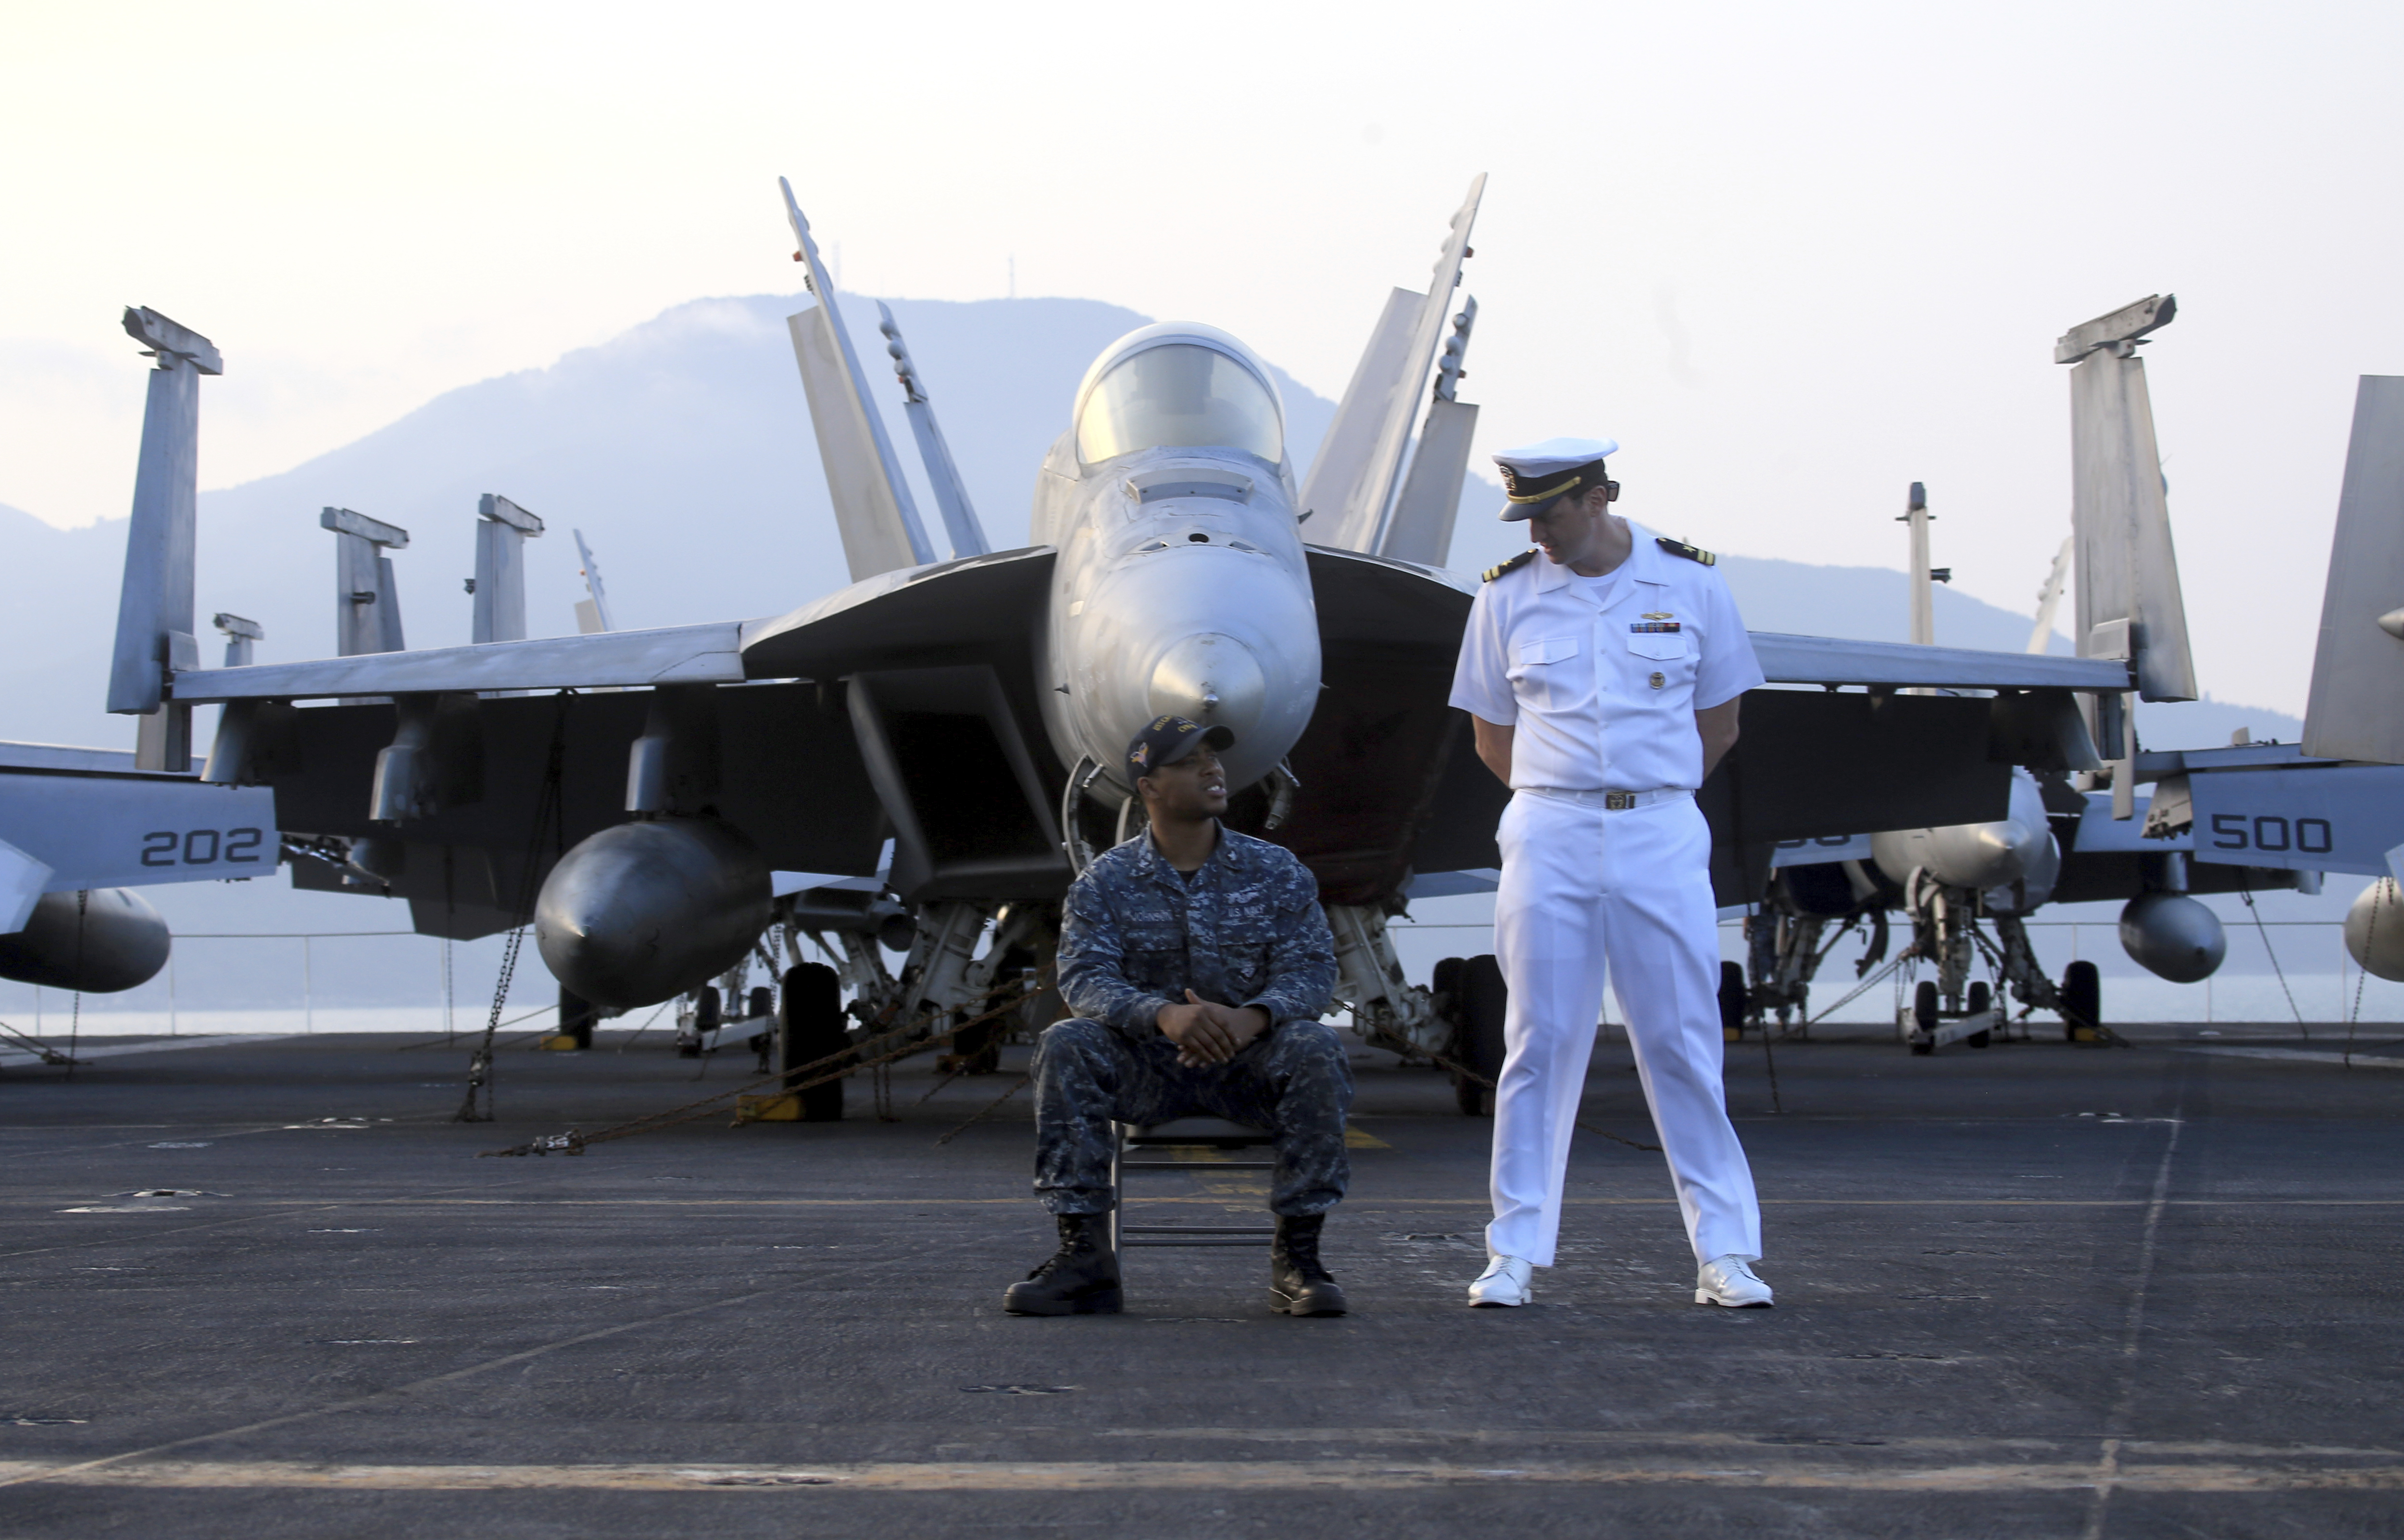 American navy officers talk to each other aboard the aircraft carrier USS Carl Vinson as it docks in Danang bay, Vietnam on Monday, March 5, 2018. For the first time since the Vietnam War, a U.S. Navy aircraft carrier is paying a visit to a Vietnamese port, seeking to bolster both countries' efforts to stem expansionism by China in the South China Sea. (AP Photo/ Hau Dinh)